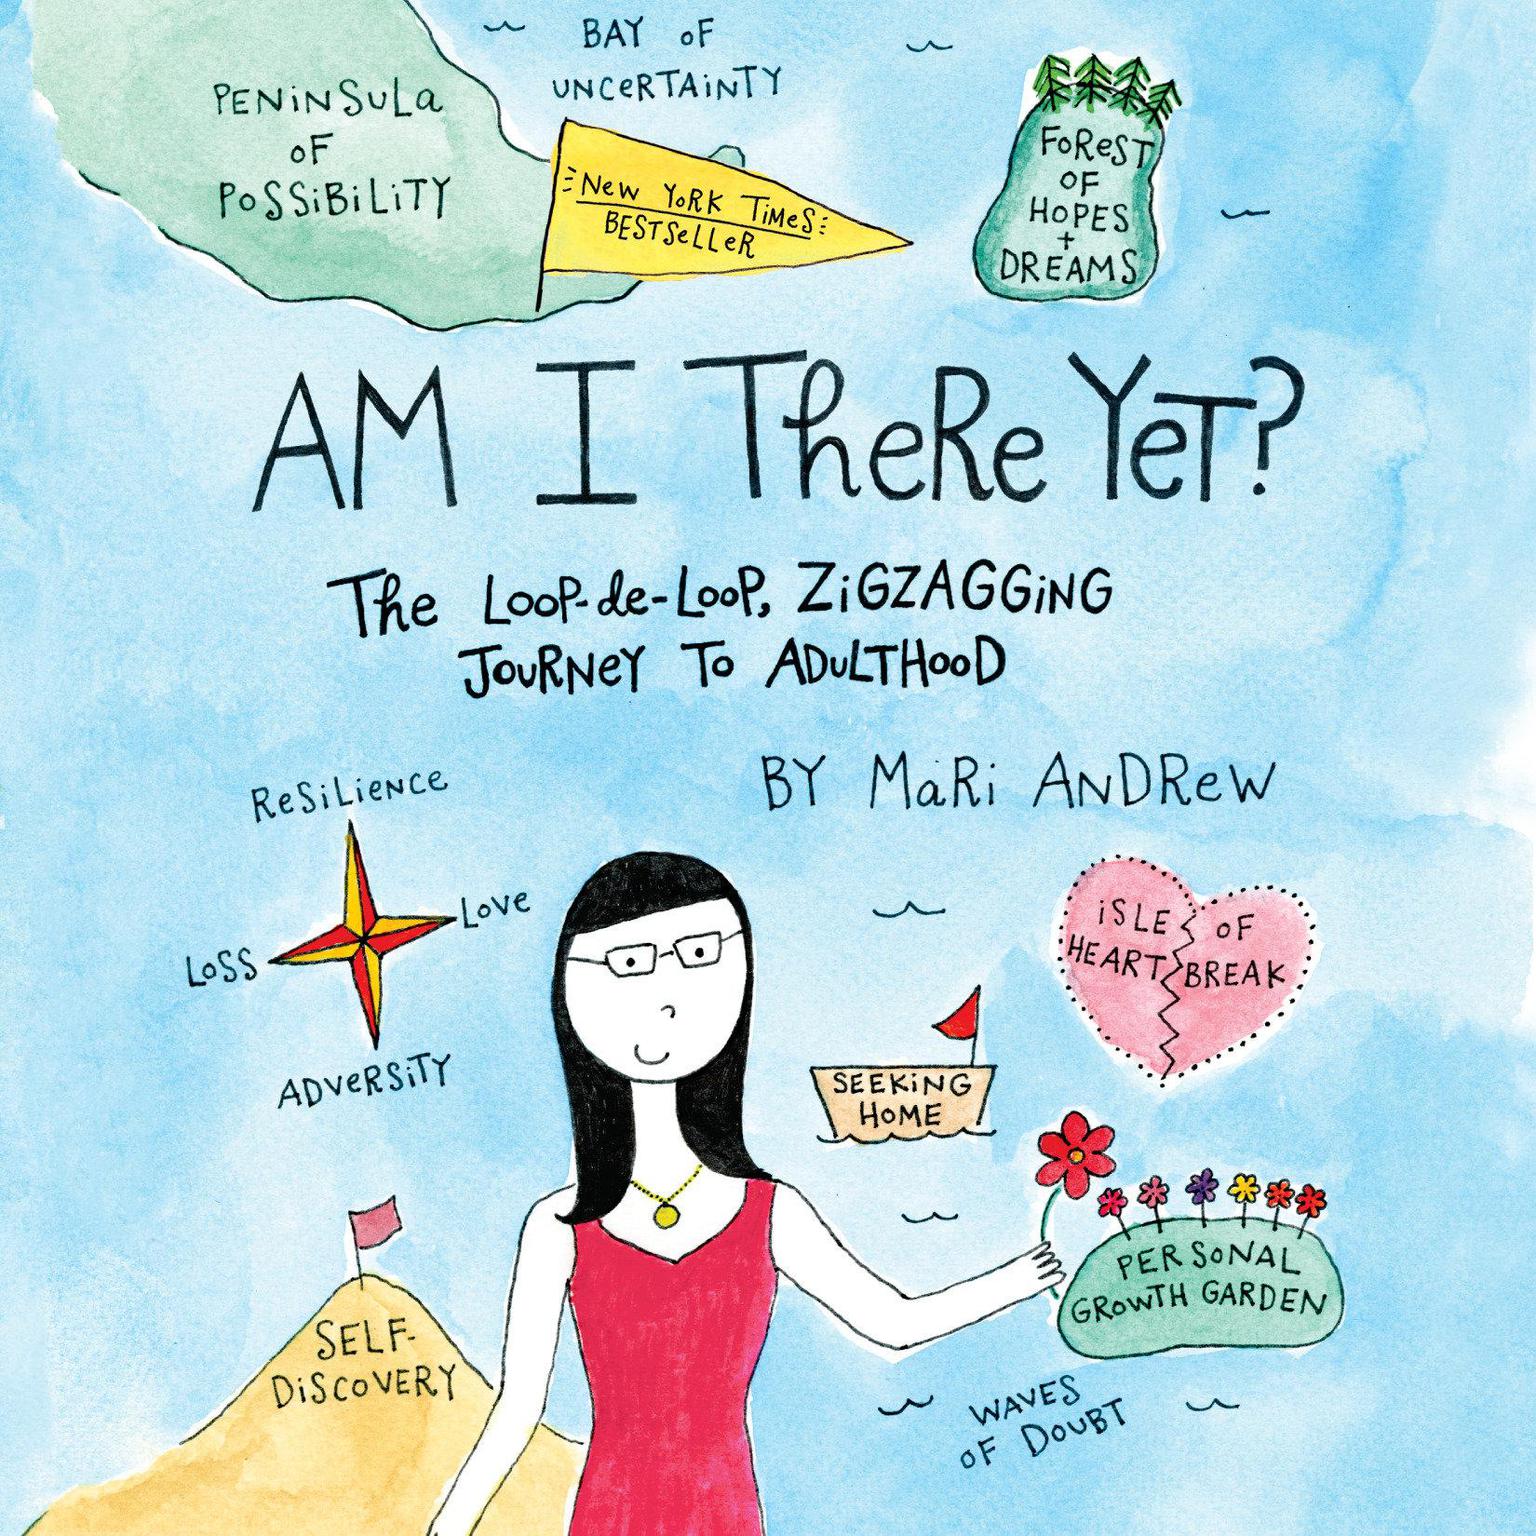 Am I There Yet?: The Loop-de-loop, Zigzagging Journey to Adulthood Audiobook, by Mari Andrew